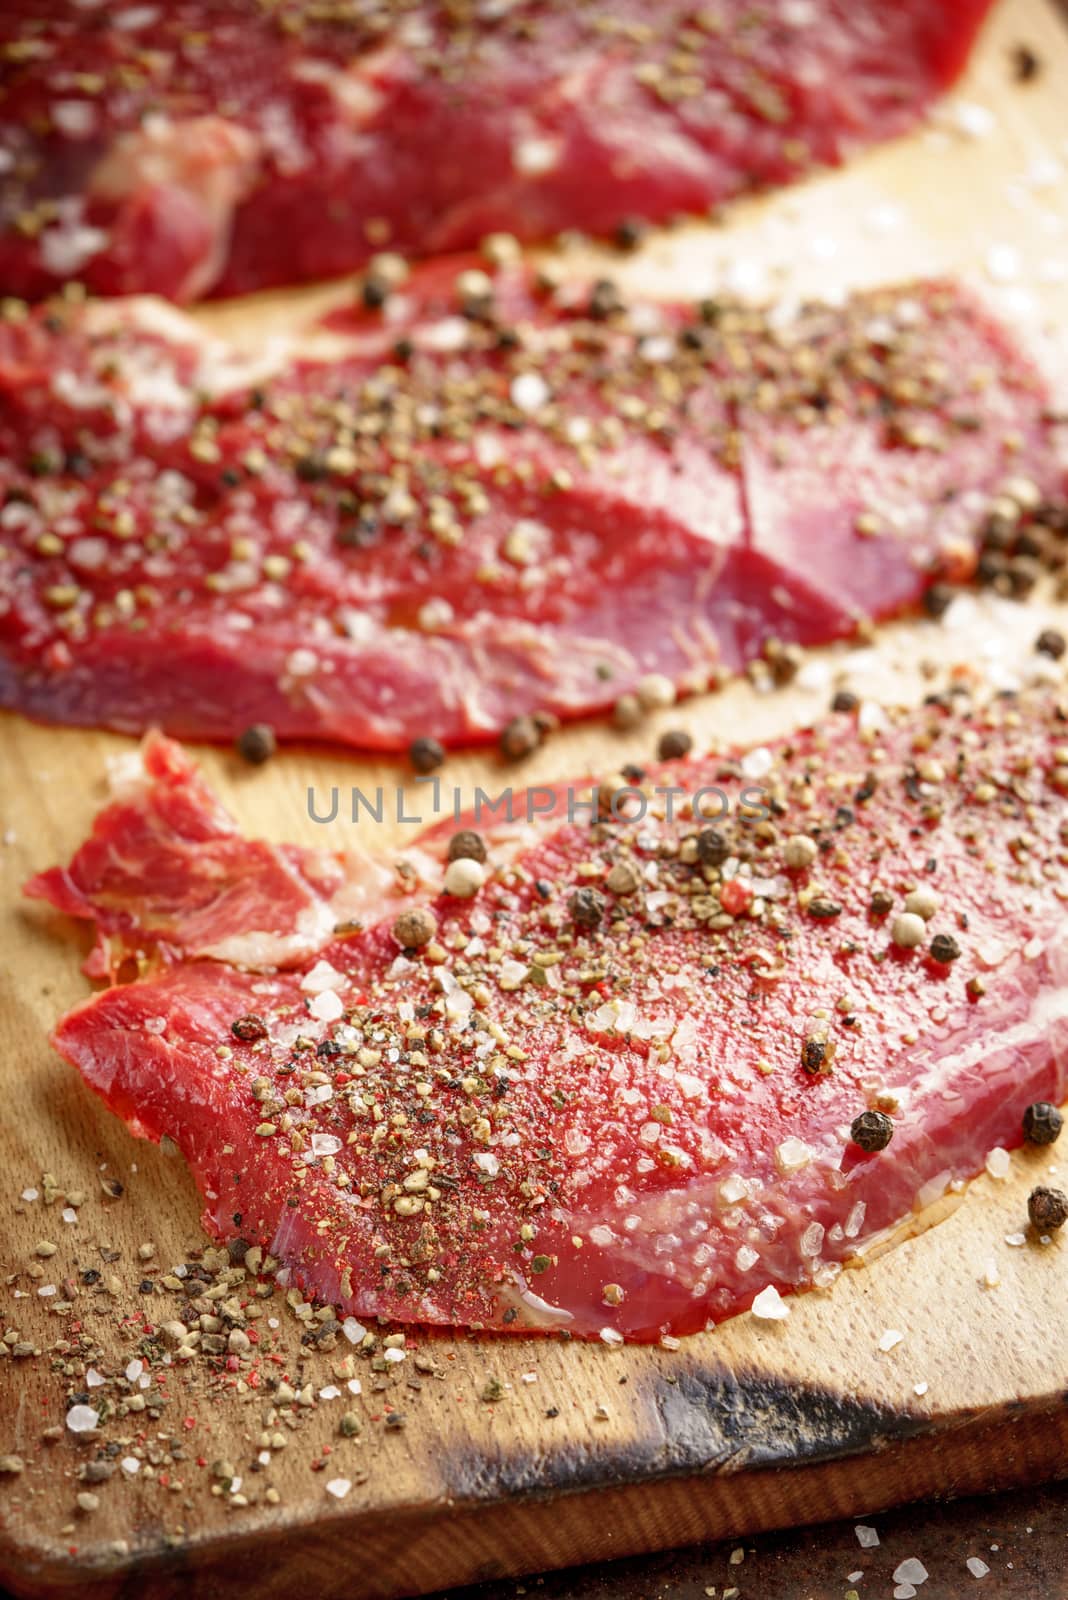 Raw beef steak and spicel on cutting board on the table vertical